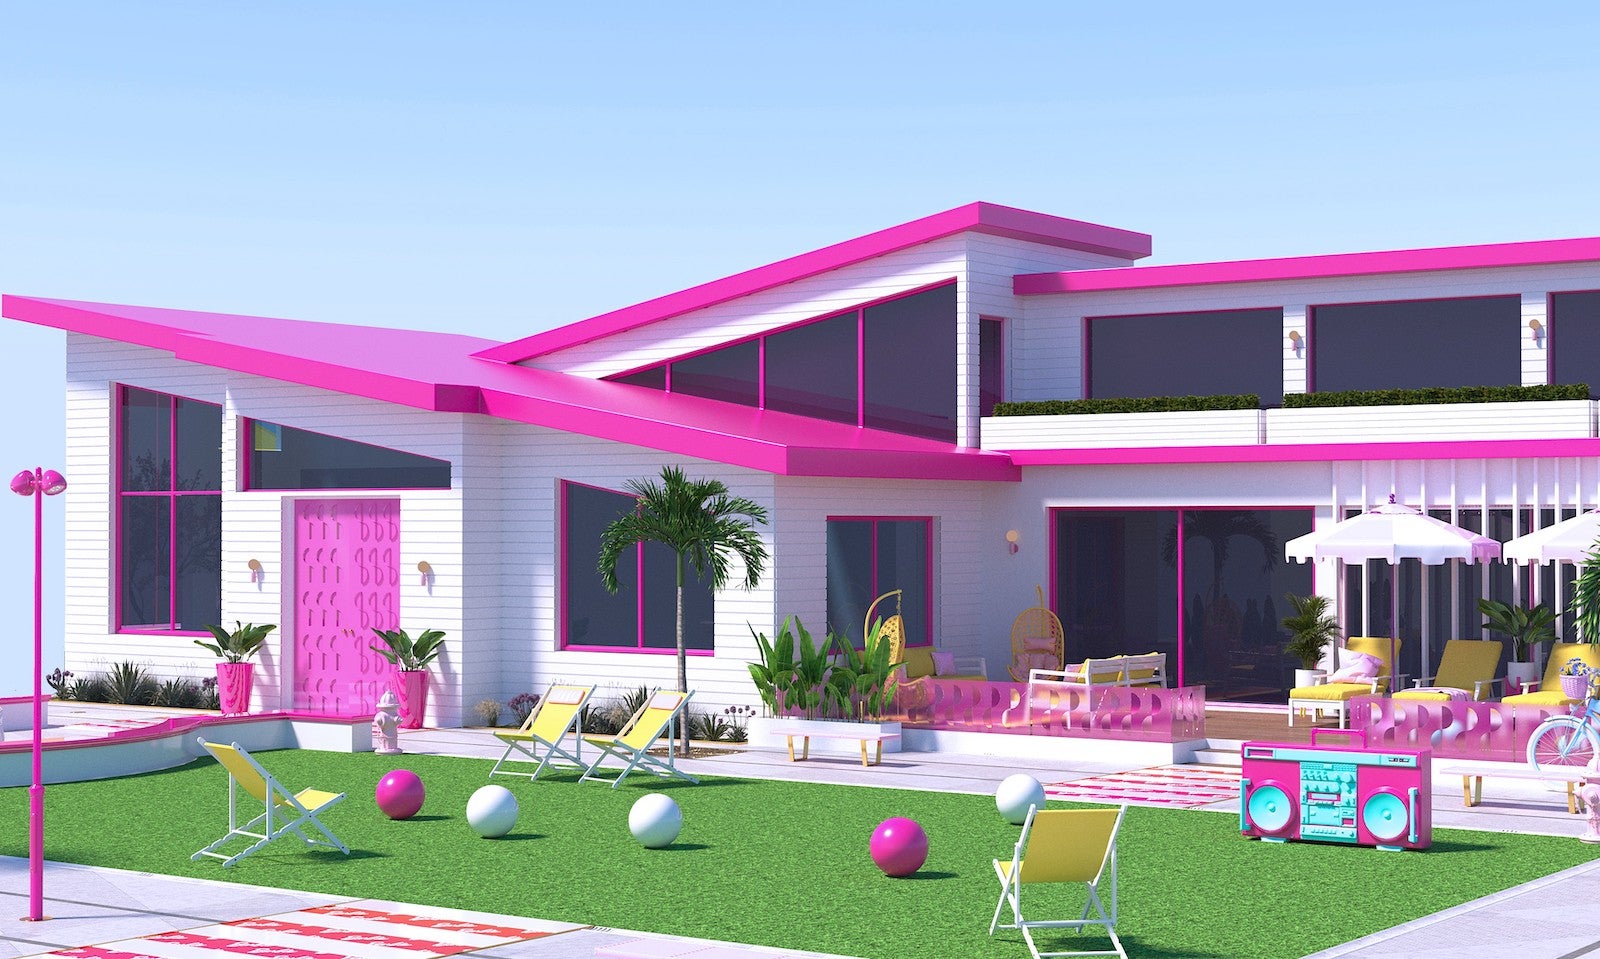 You can visit a real Barbie dream house this summer Dreamhouse